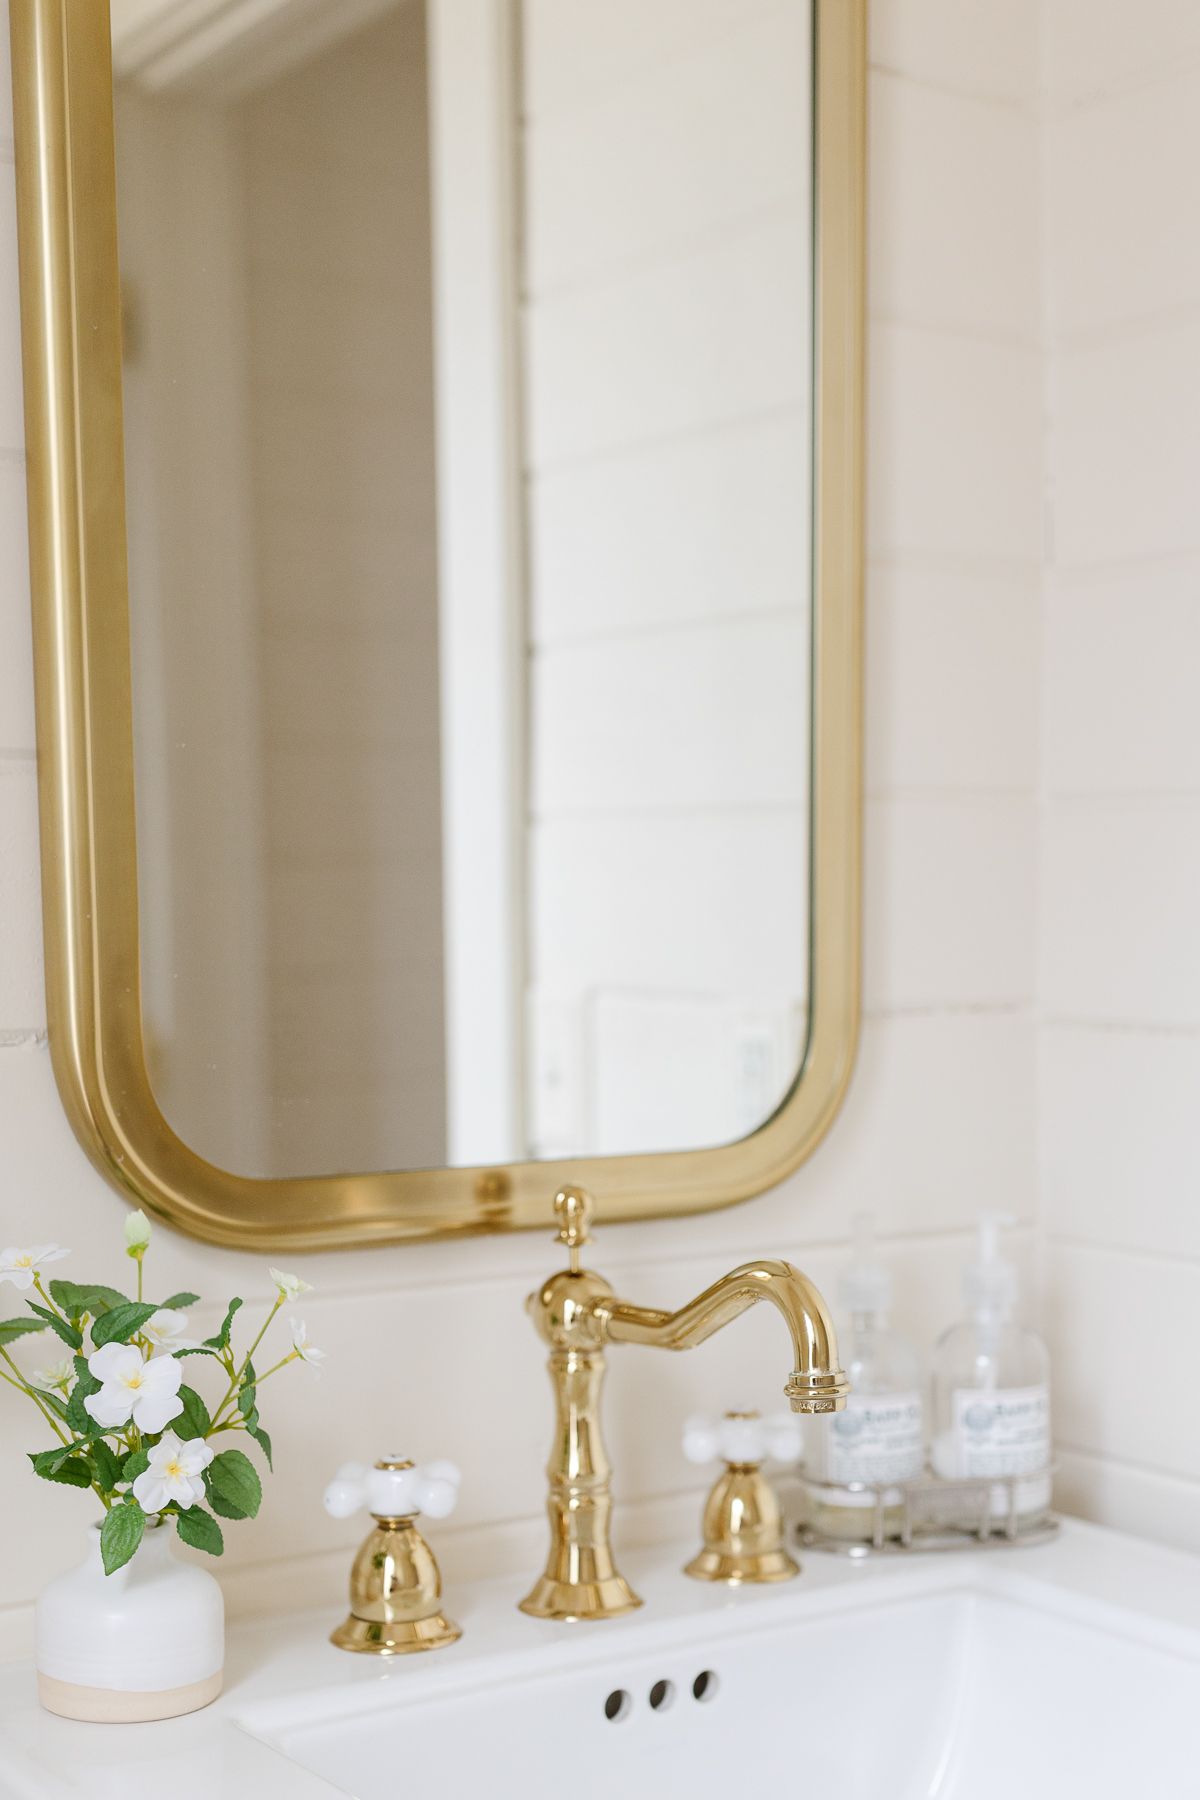 A cozy home with brass metals in a white bathroom TeamJiX